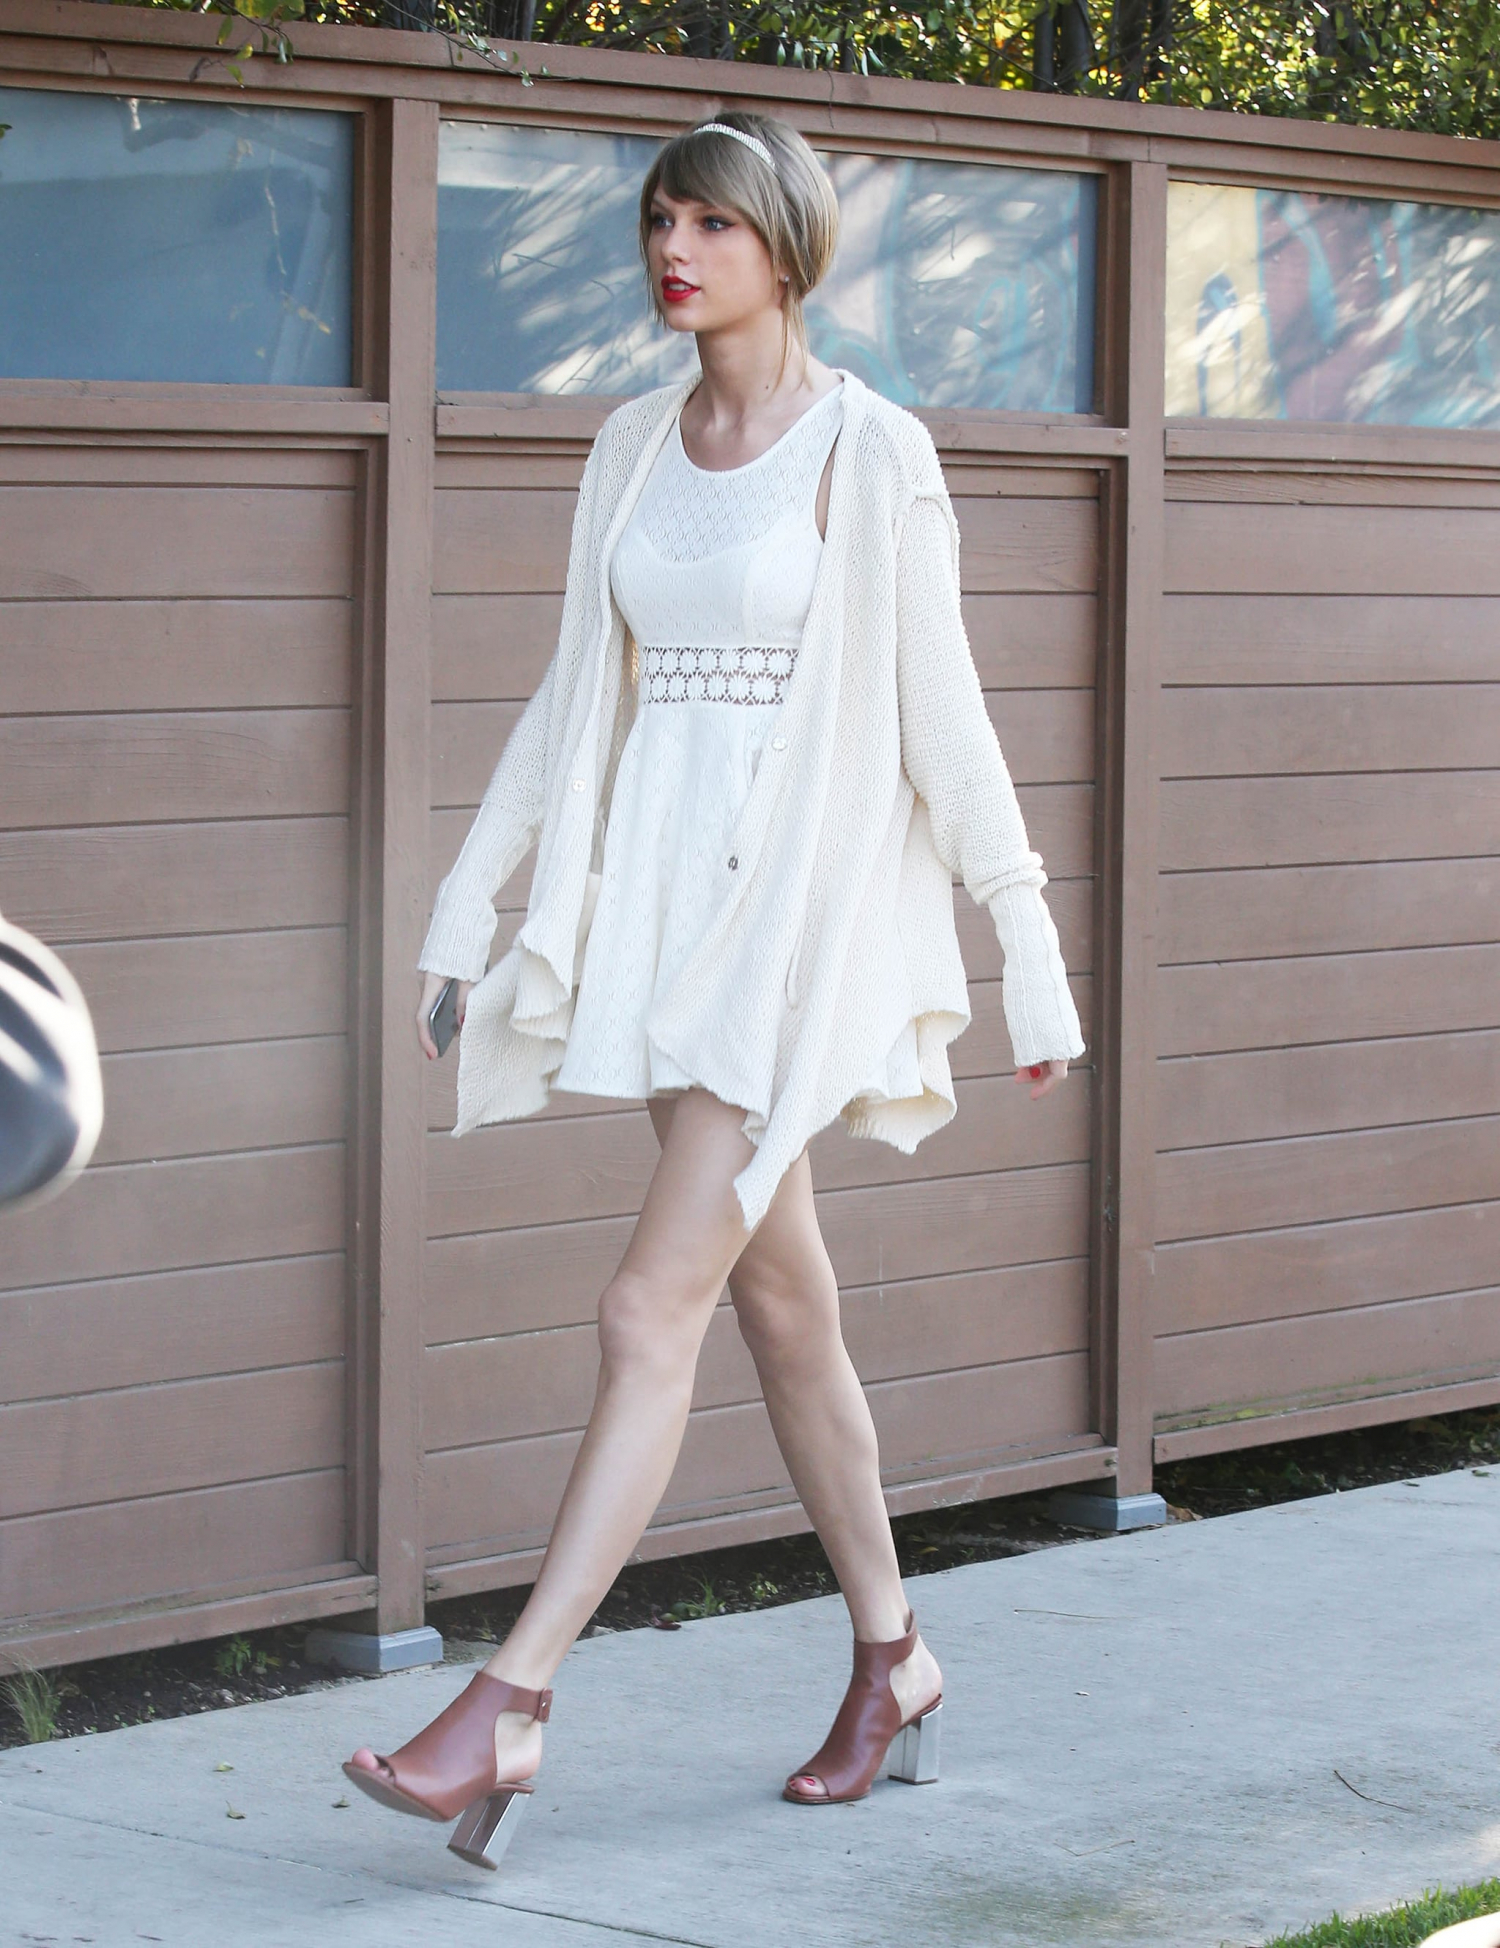 Taylor-Swift-wore-white-dress-her-Wednesday-out-LA.jpg